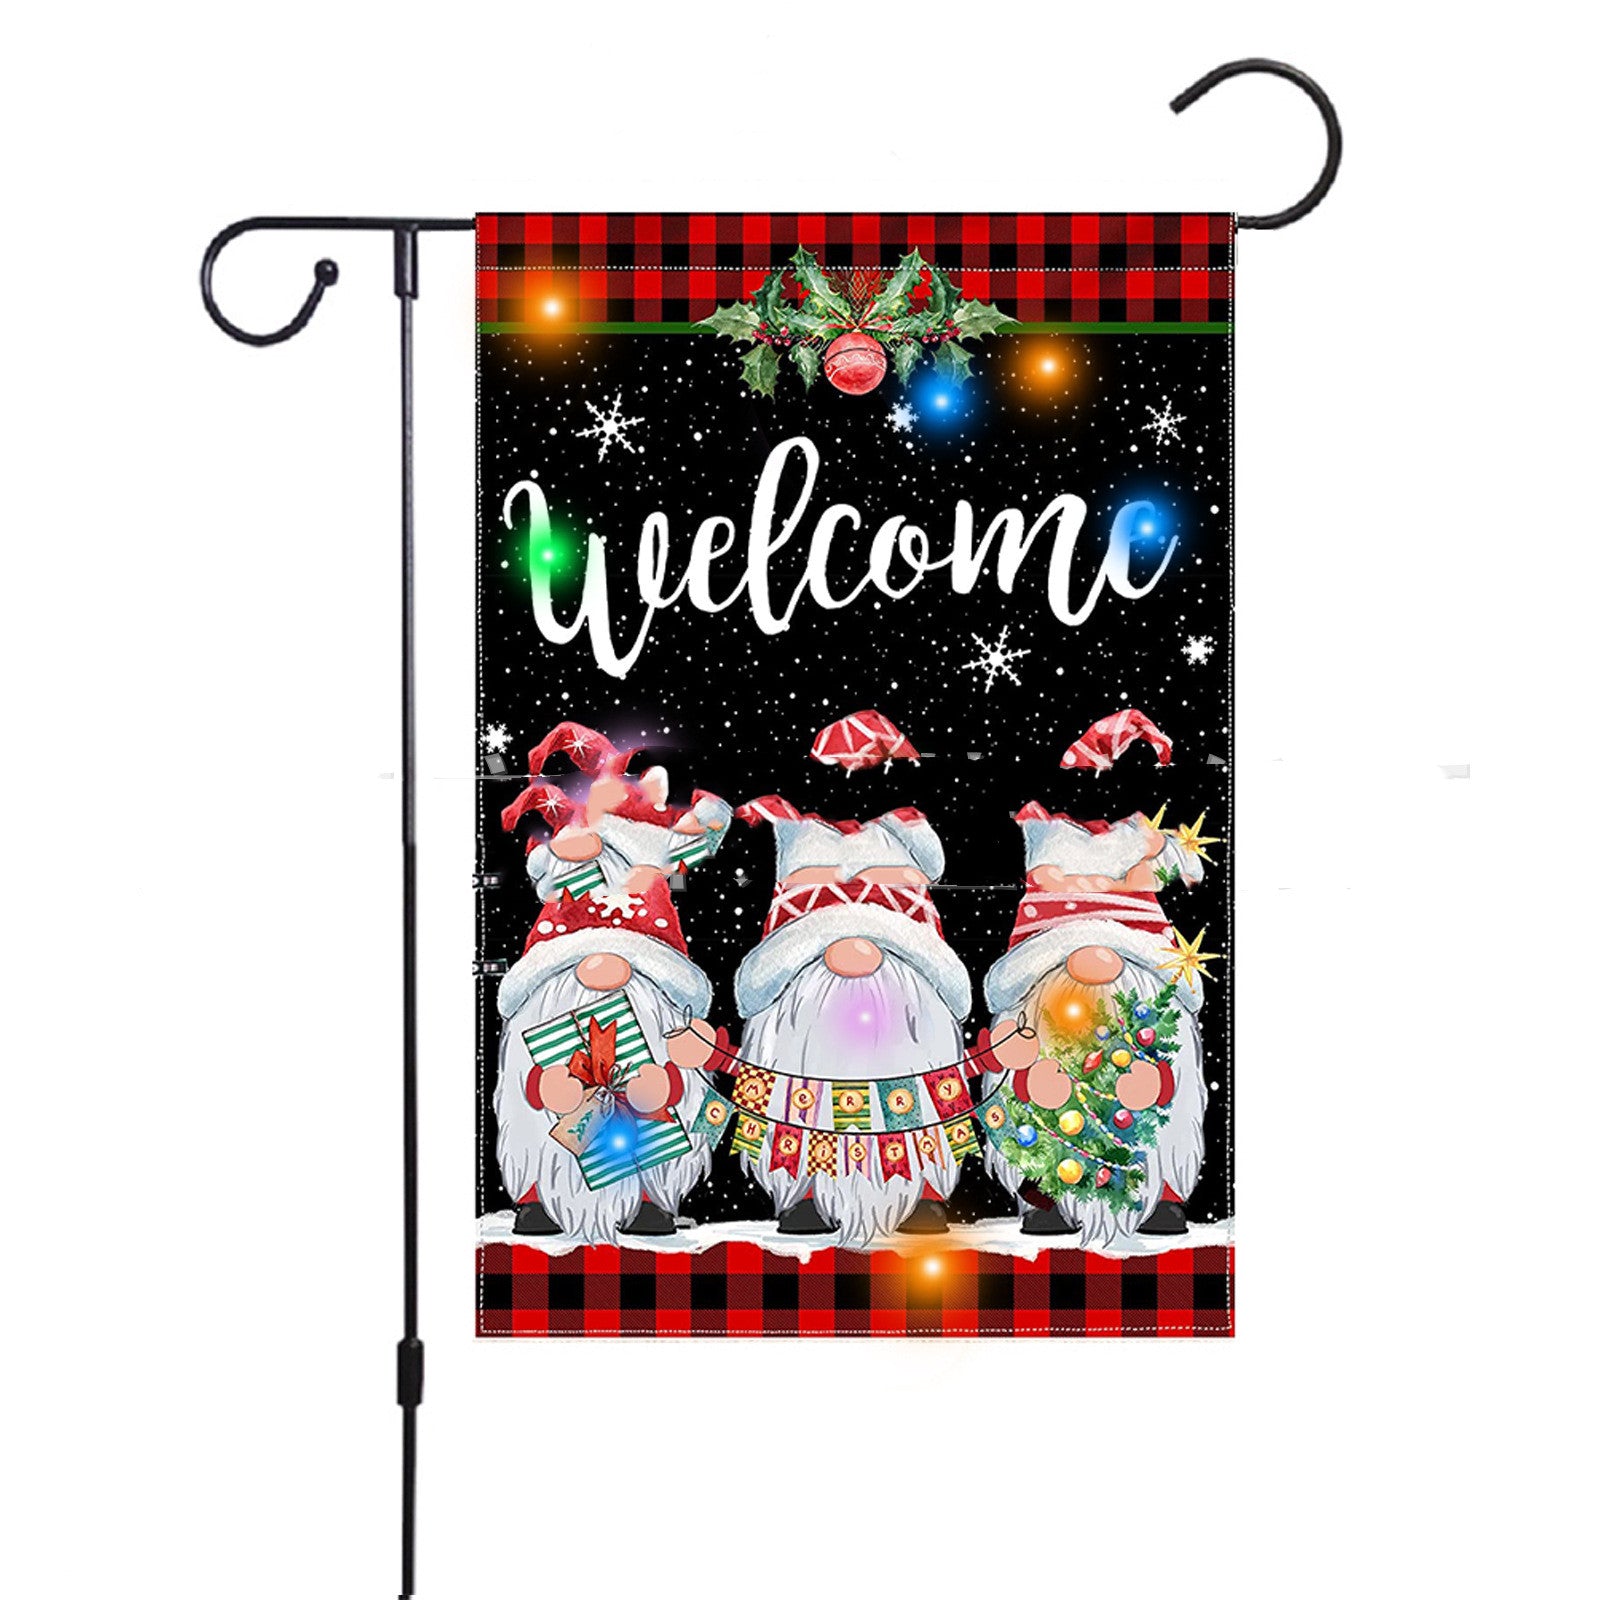 Outdoor Decoration Christmas With Lights Garden Flag, Outdoor and Indoor Christmas decorations Items, Christmas ornaments, Christmas tree decorations, salt dough ornaments, Christmas window decorations, cheap Christmas decorations, snowmen, and ornaments.